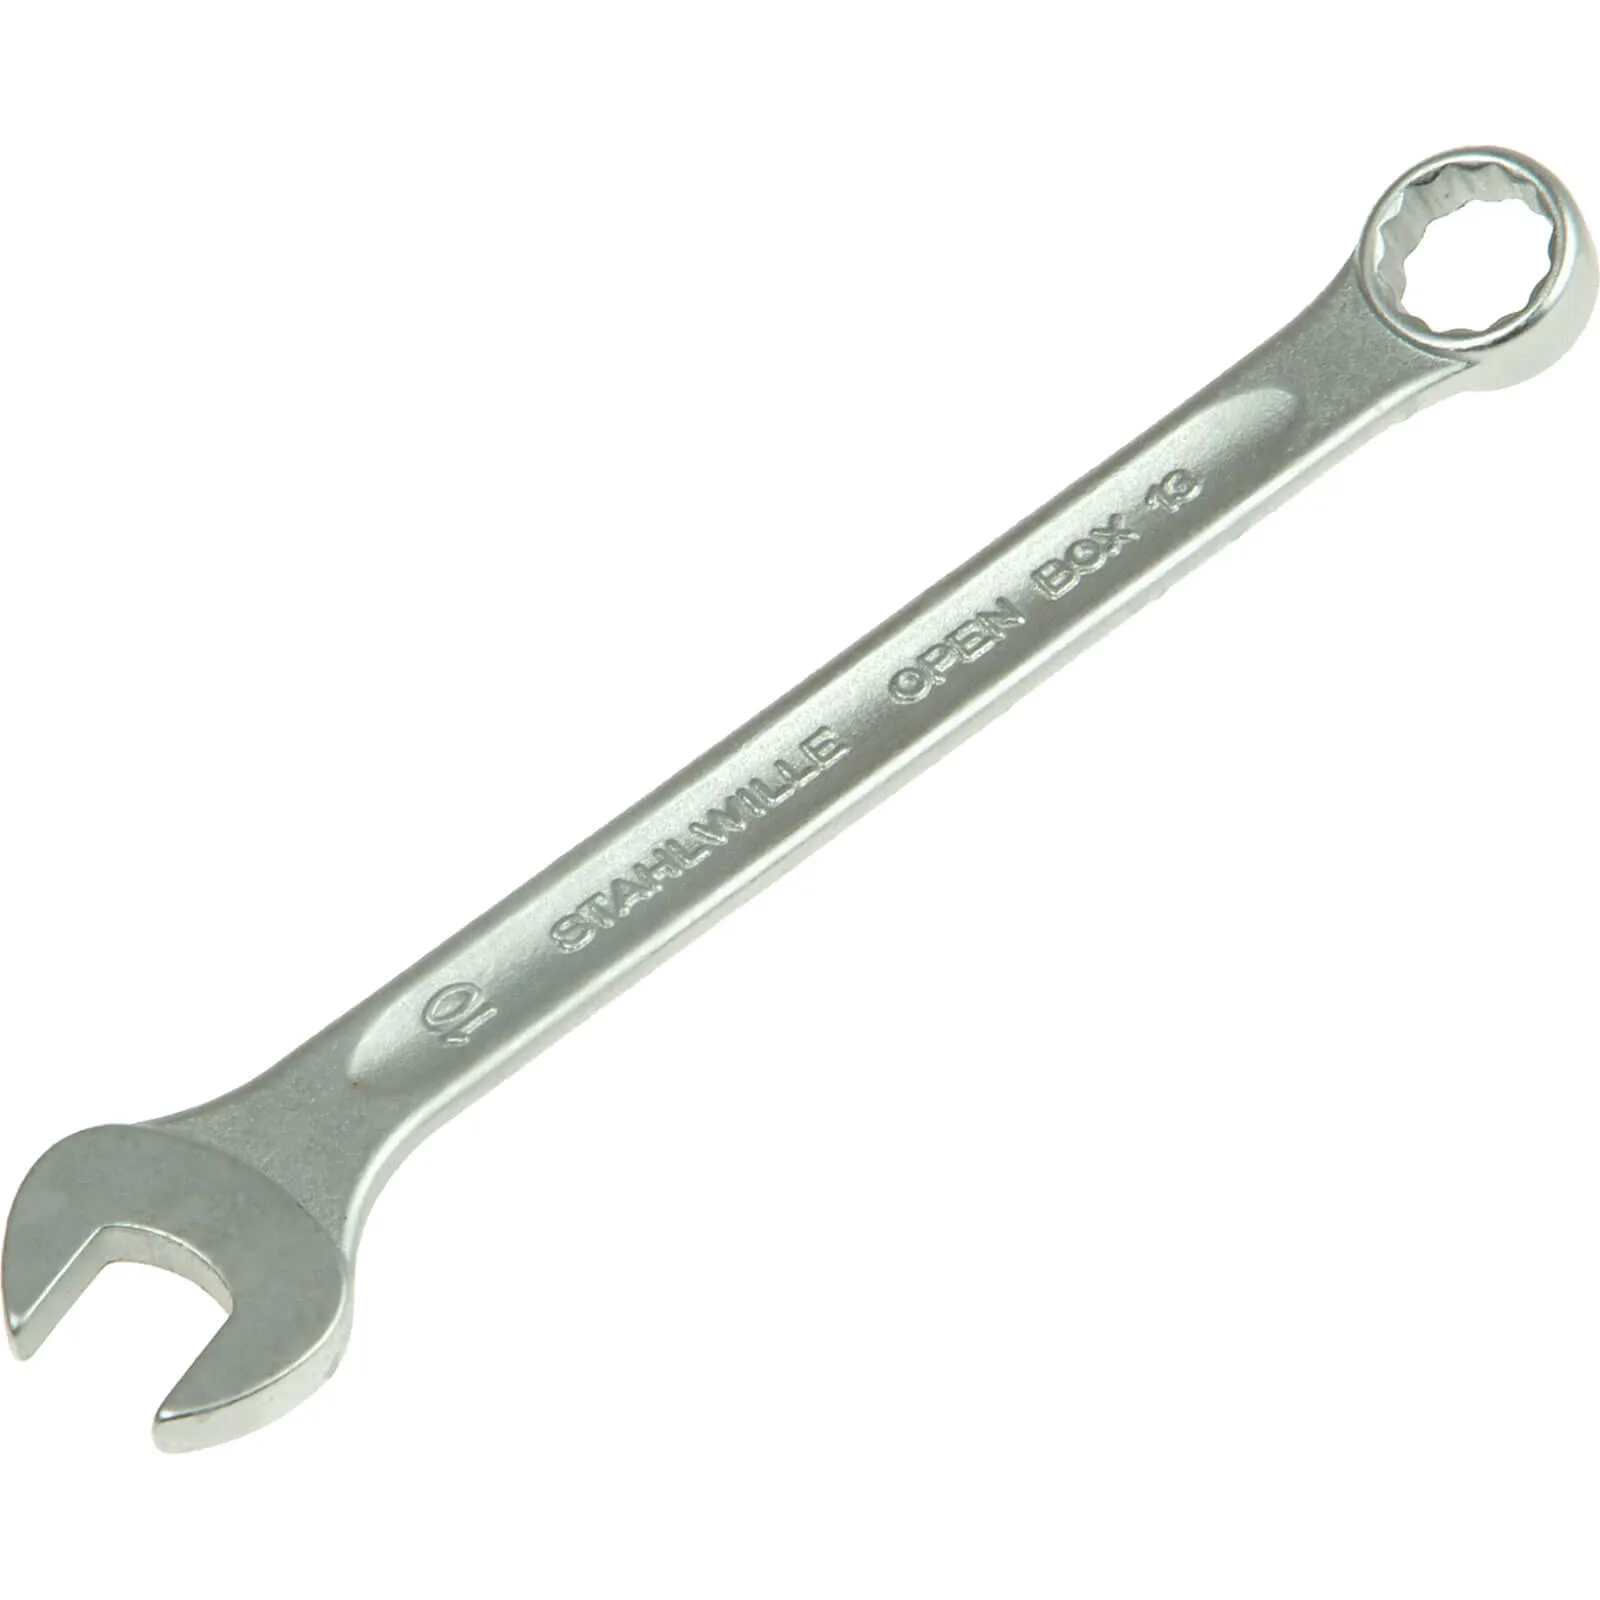 Stahlwille 13 Series Combination Spanner Metric - 21mm